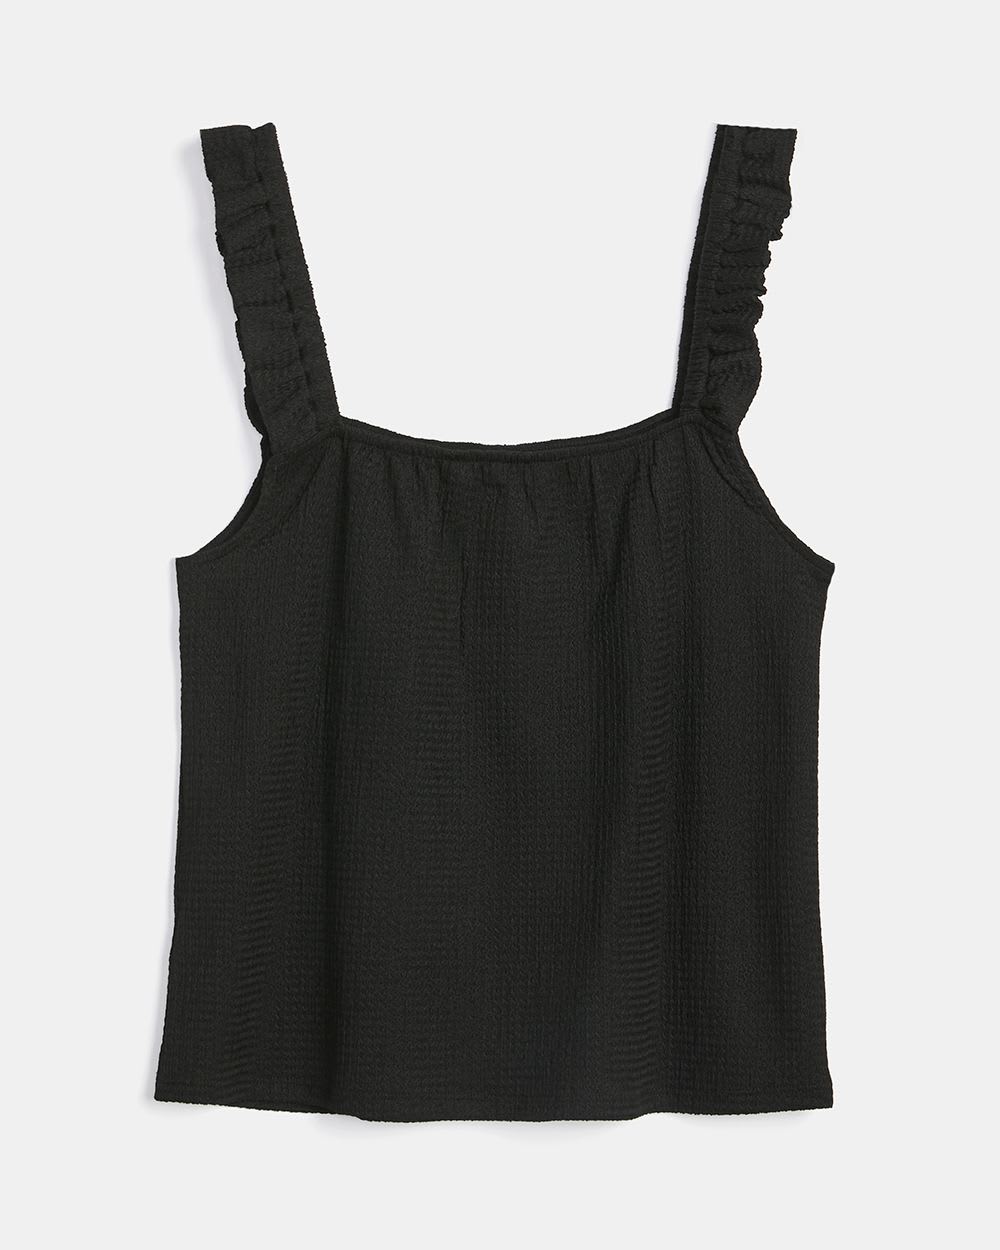 Square-Neck Blistered Tank Top with Frilly Straps